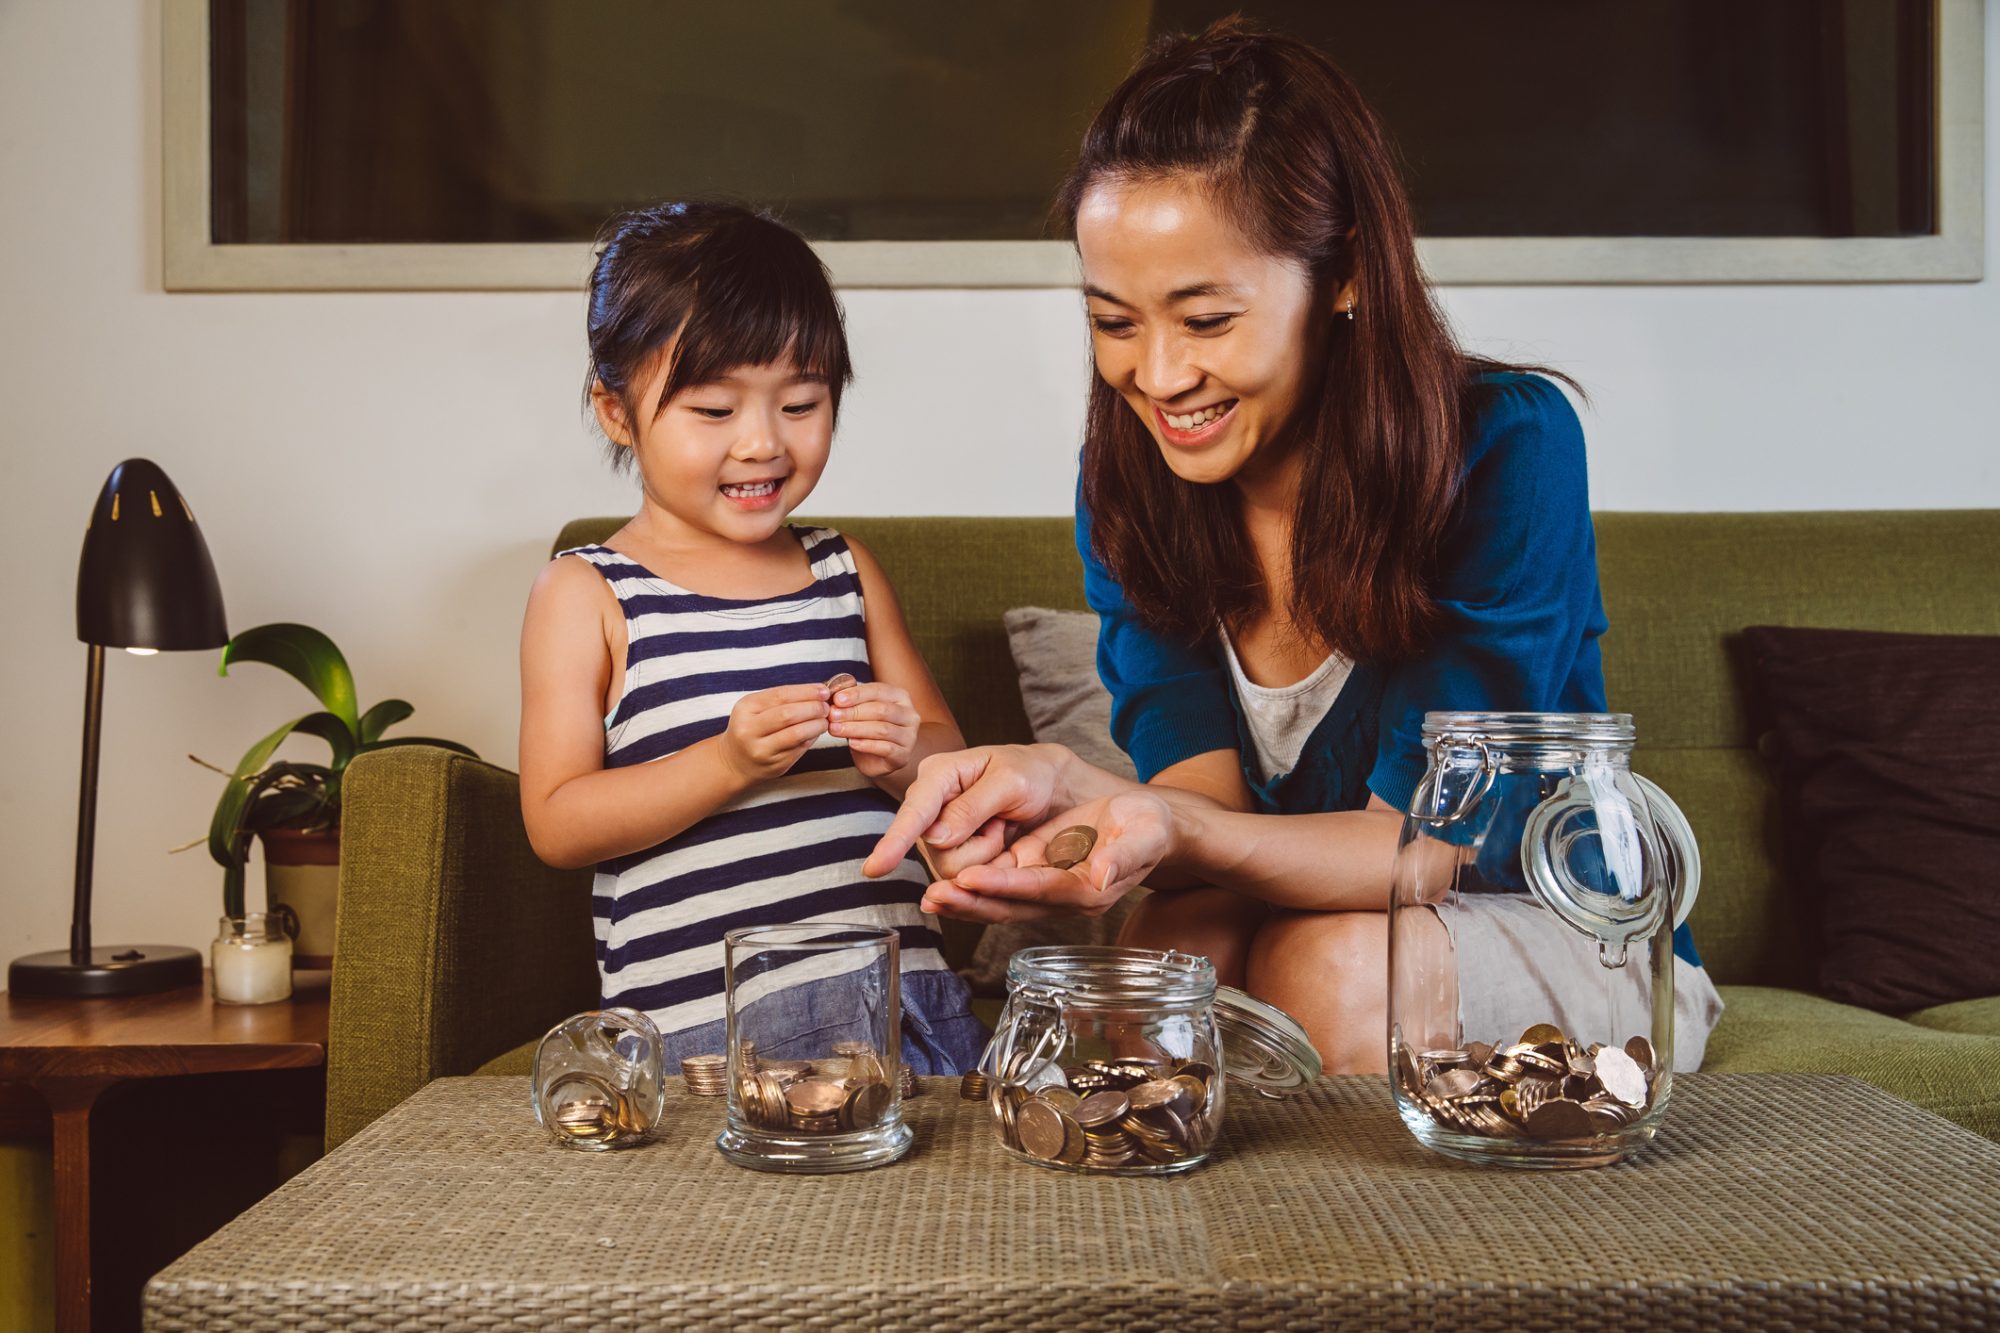 An image of a mother and her daughter with money.